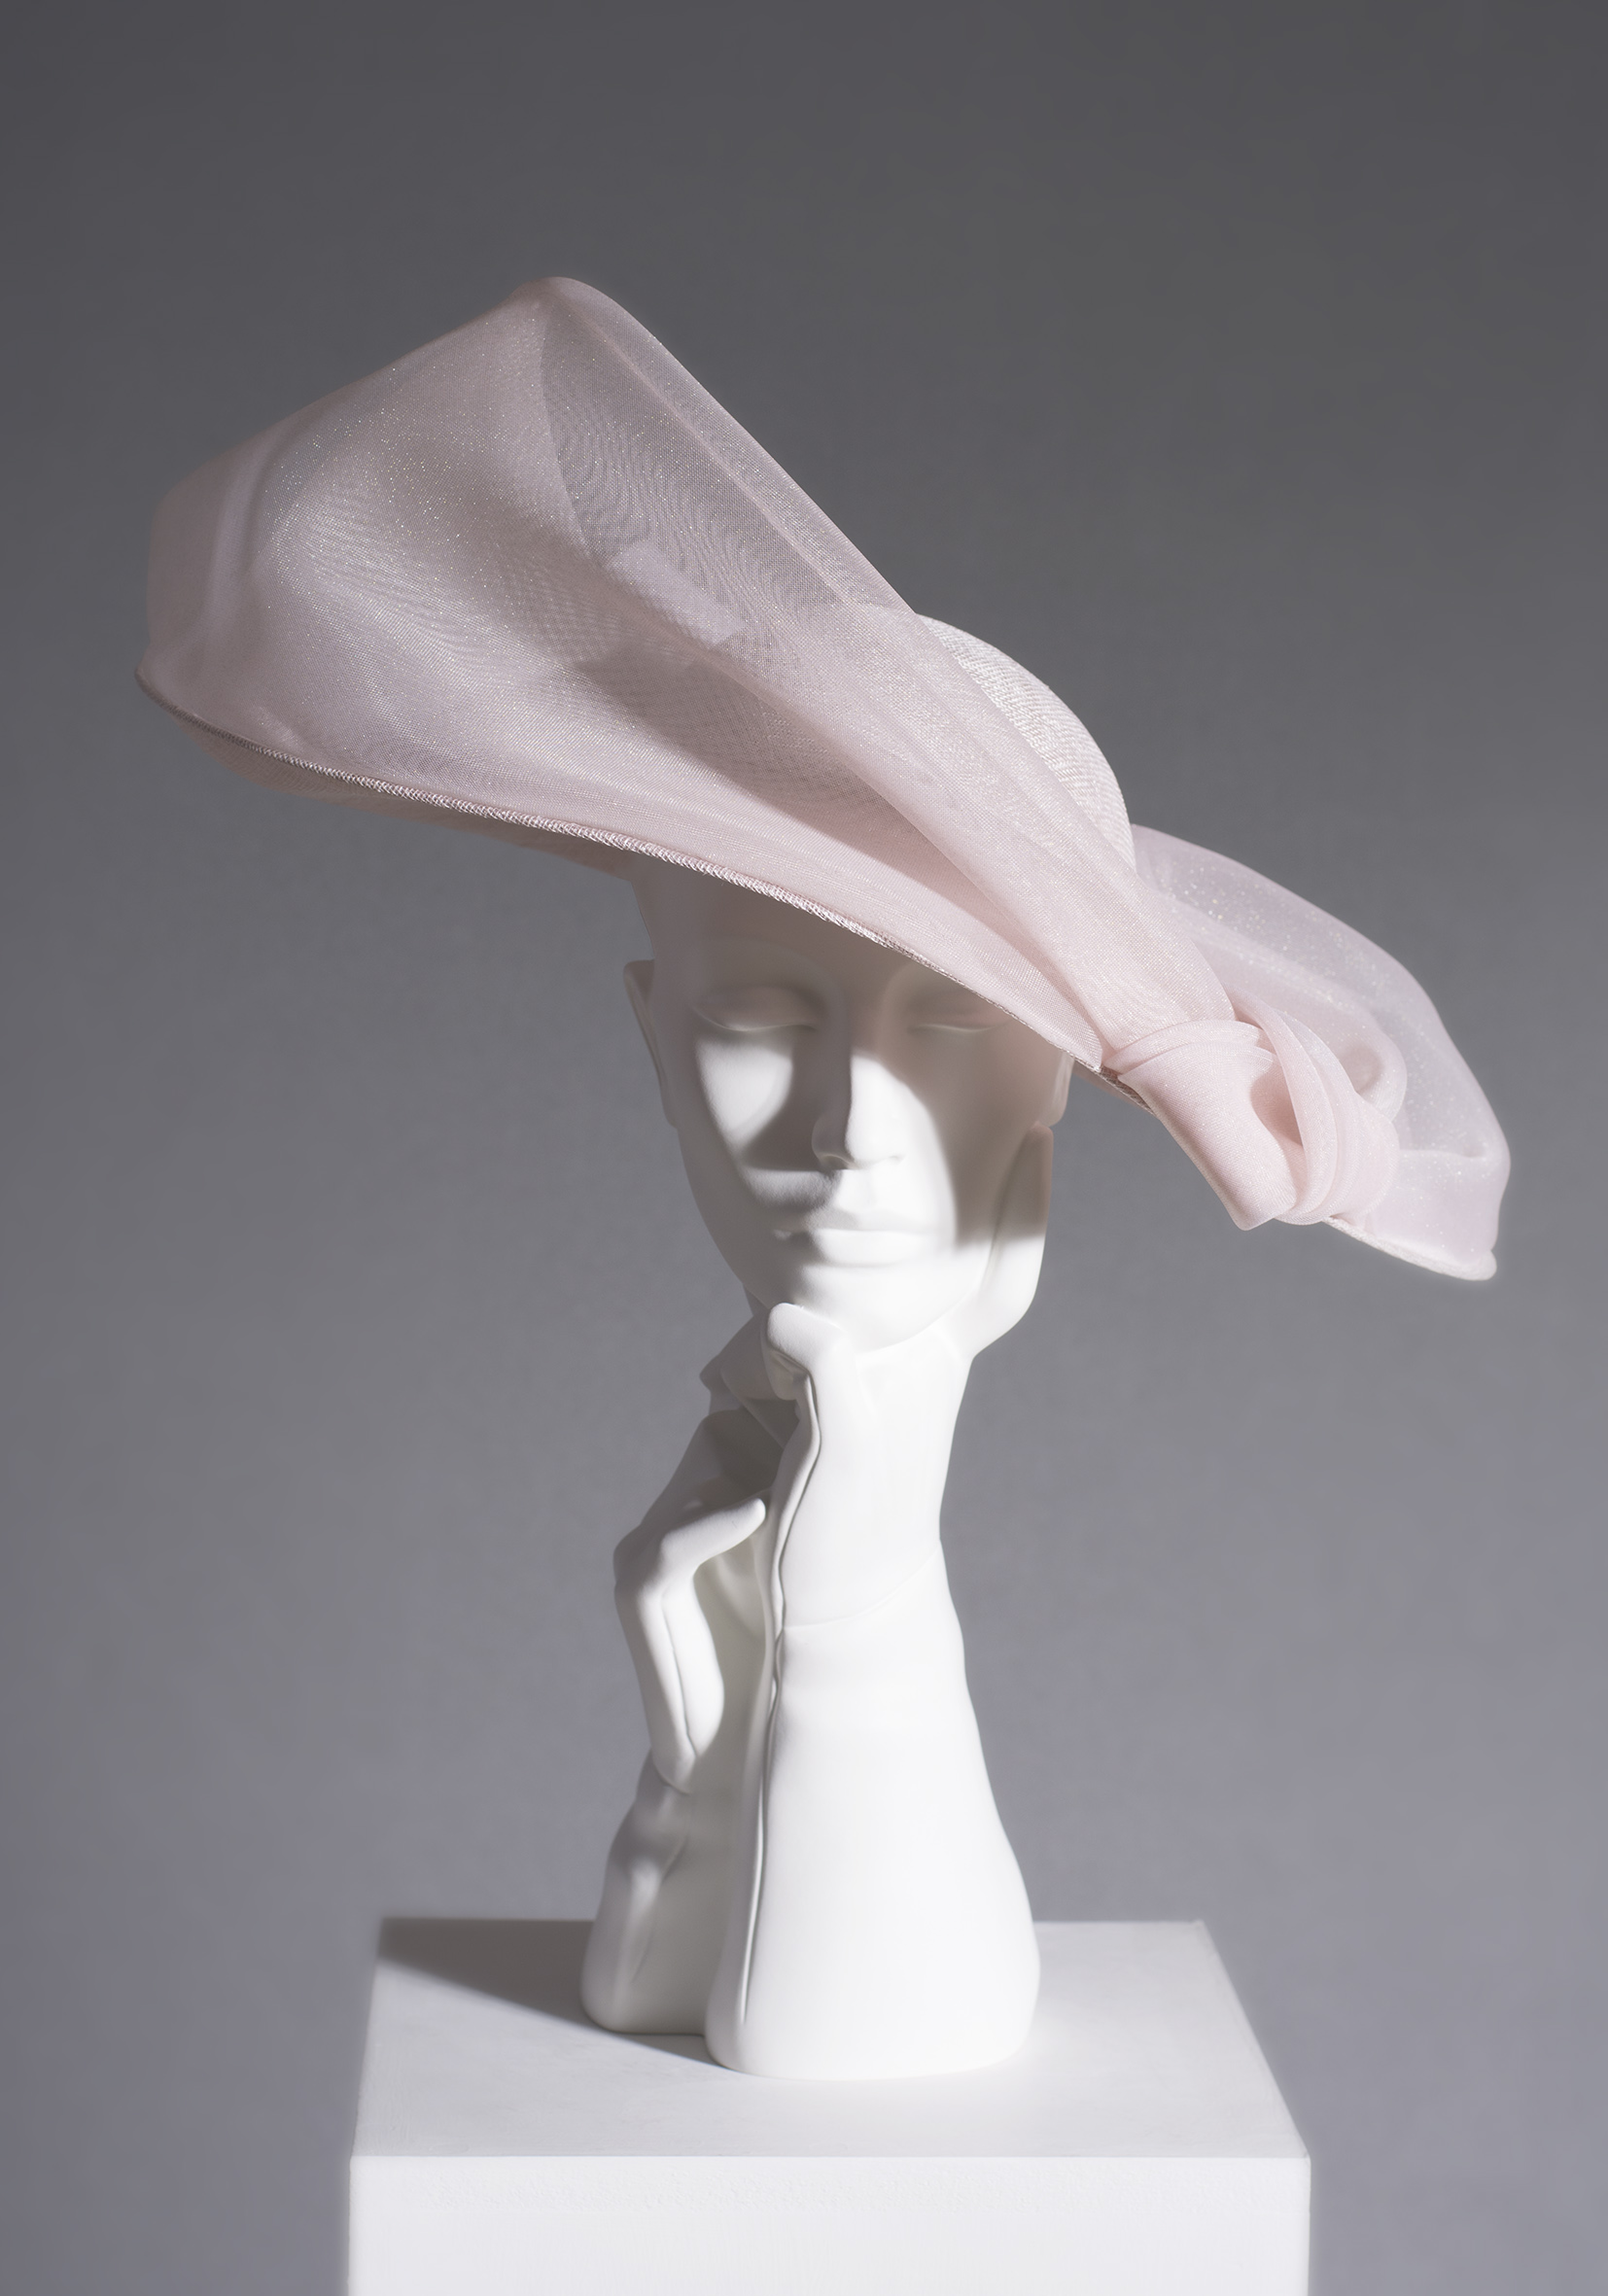 SS16 — William Chambers Millinery